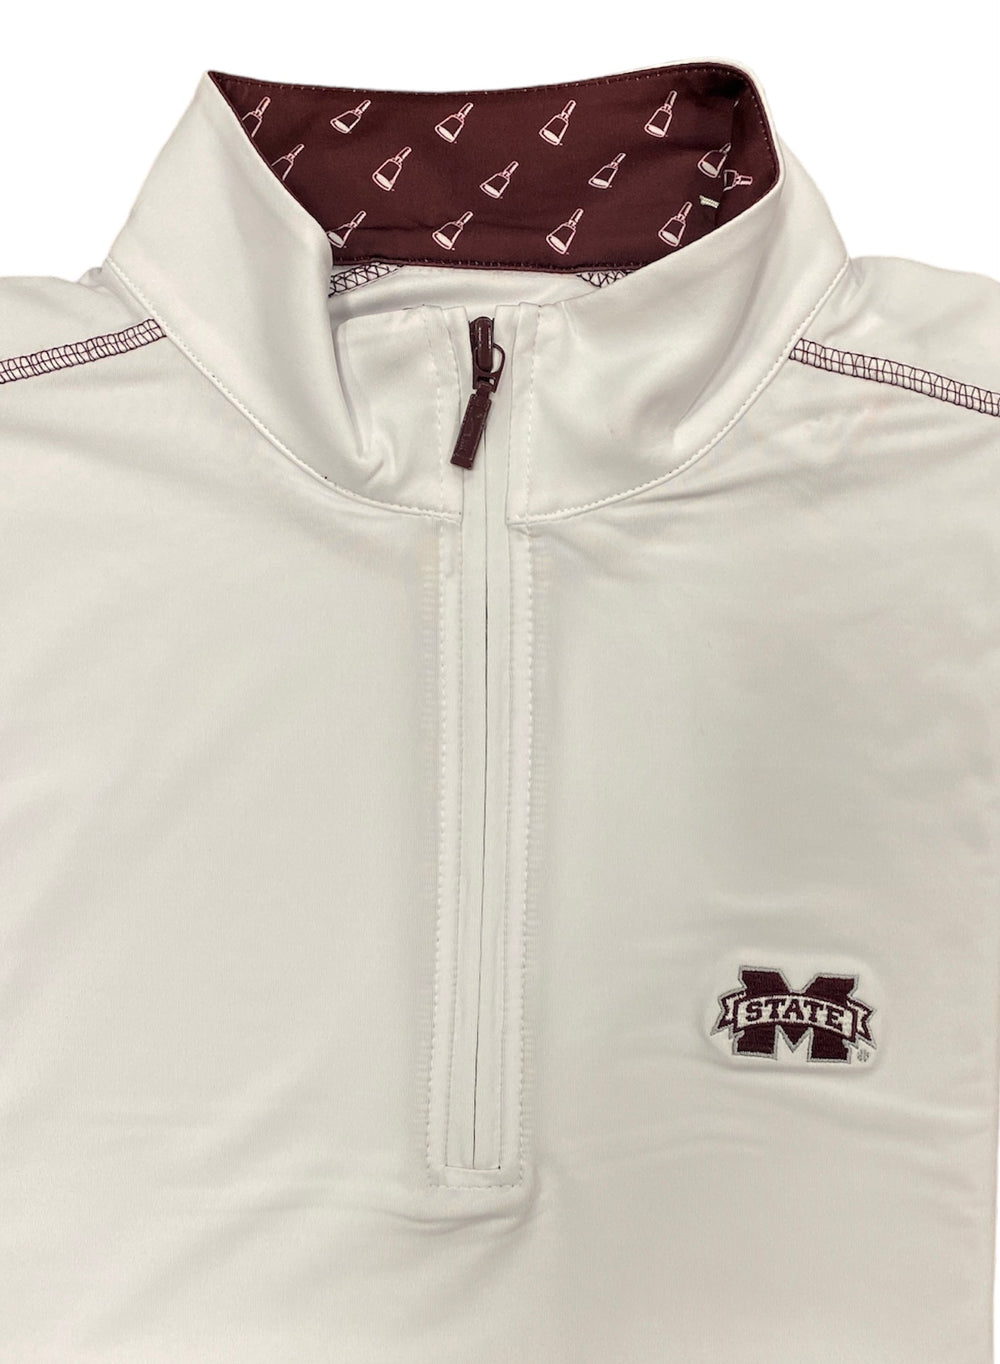 Varsity Tailgate White 1/4 Zip with Cowbells in the Collar